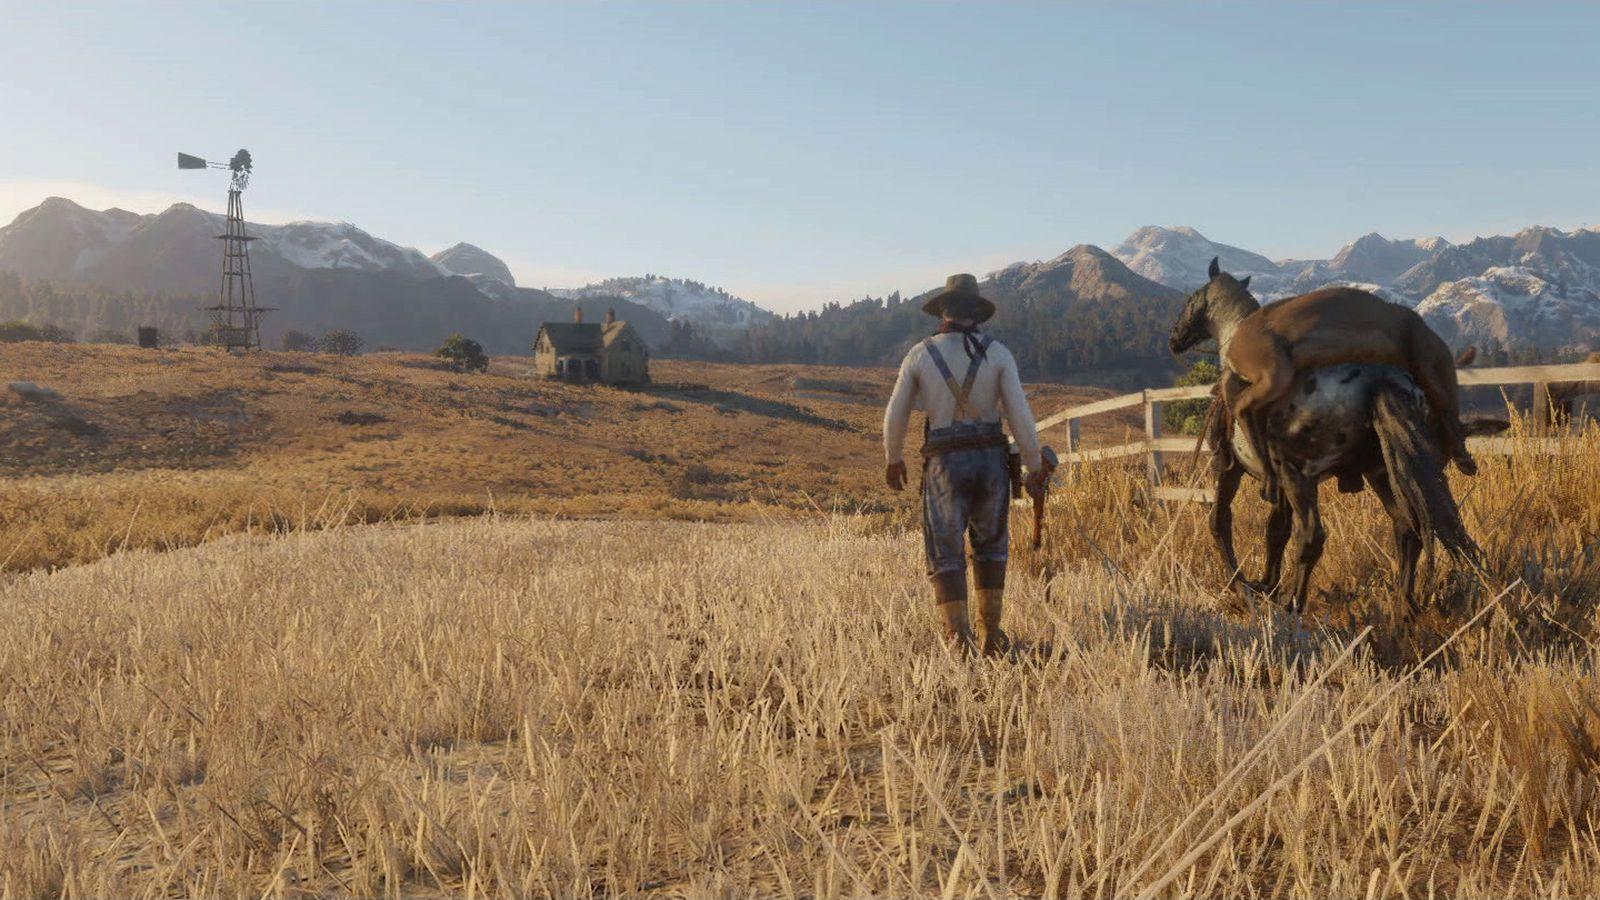 Red Dead Redemption 2 will have something exclusive for PS4 players